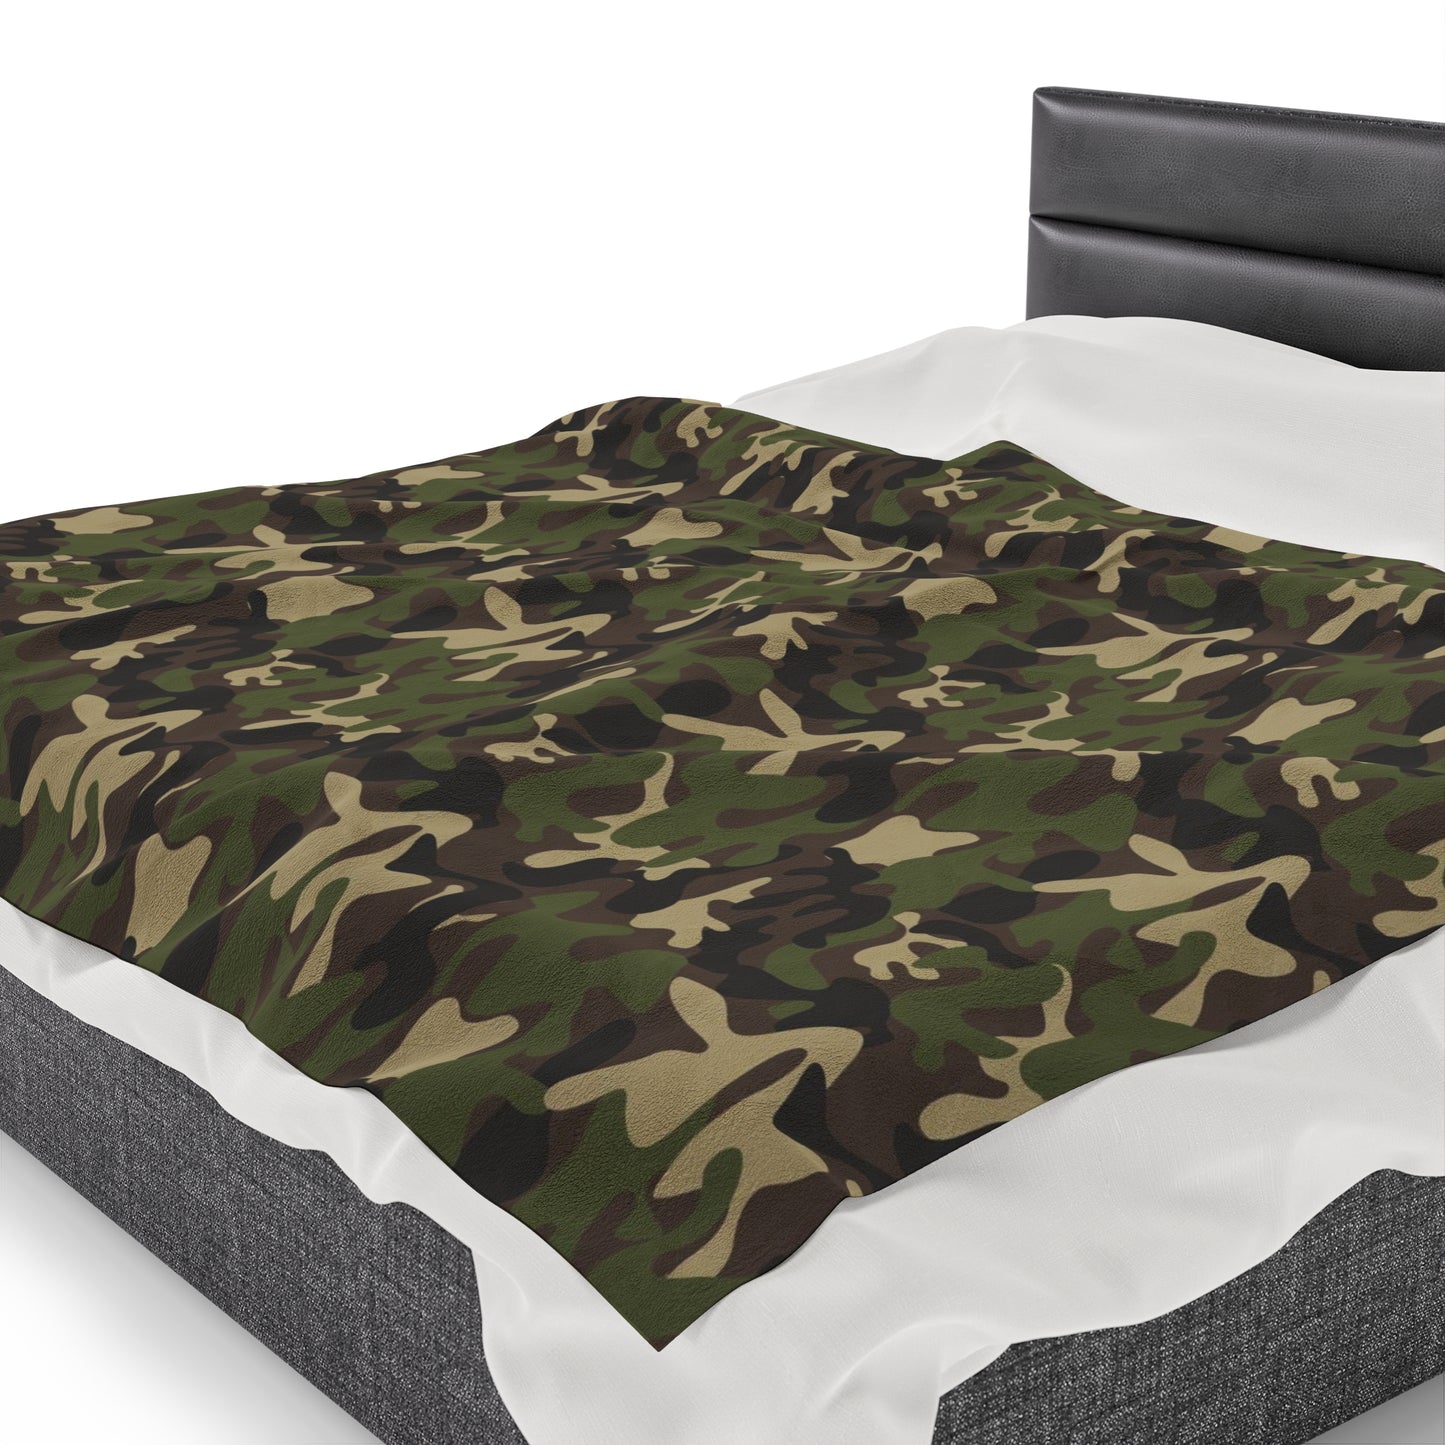 Camo Fleece Throw Blanket, Army Green Camouflage Velveteen Soft Plush Fluffy Cozy Warm Adult Kids Small Large Sofa Bed Decor 50x60